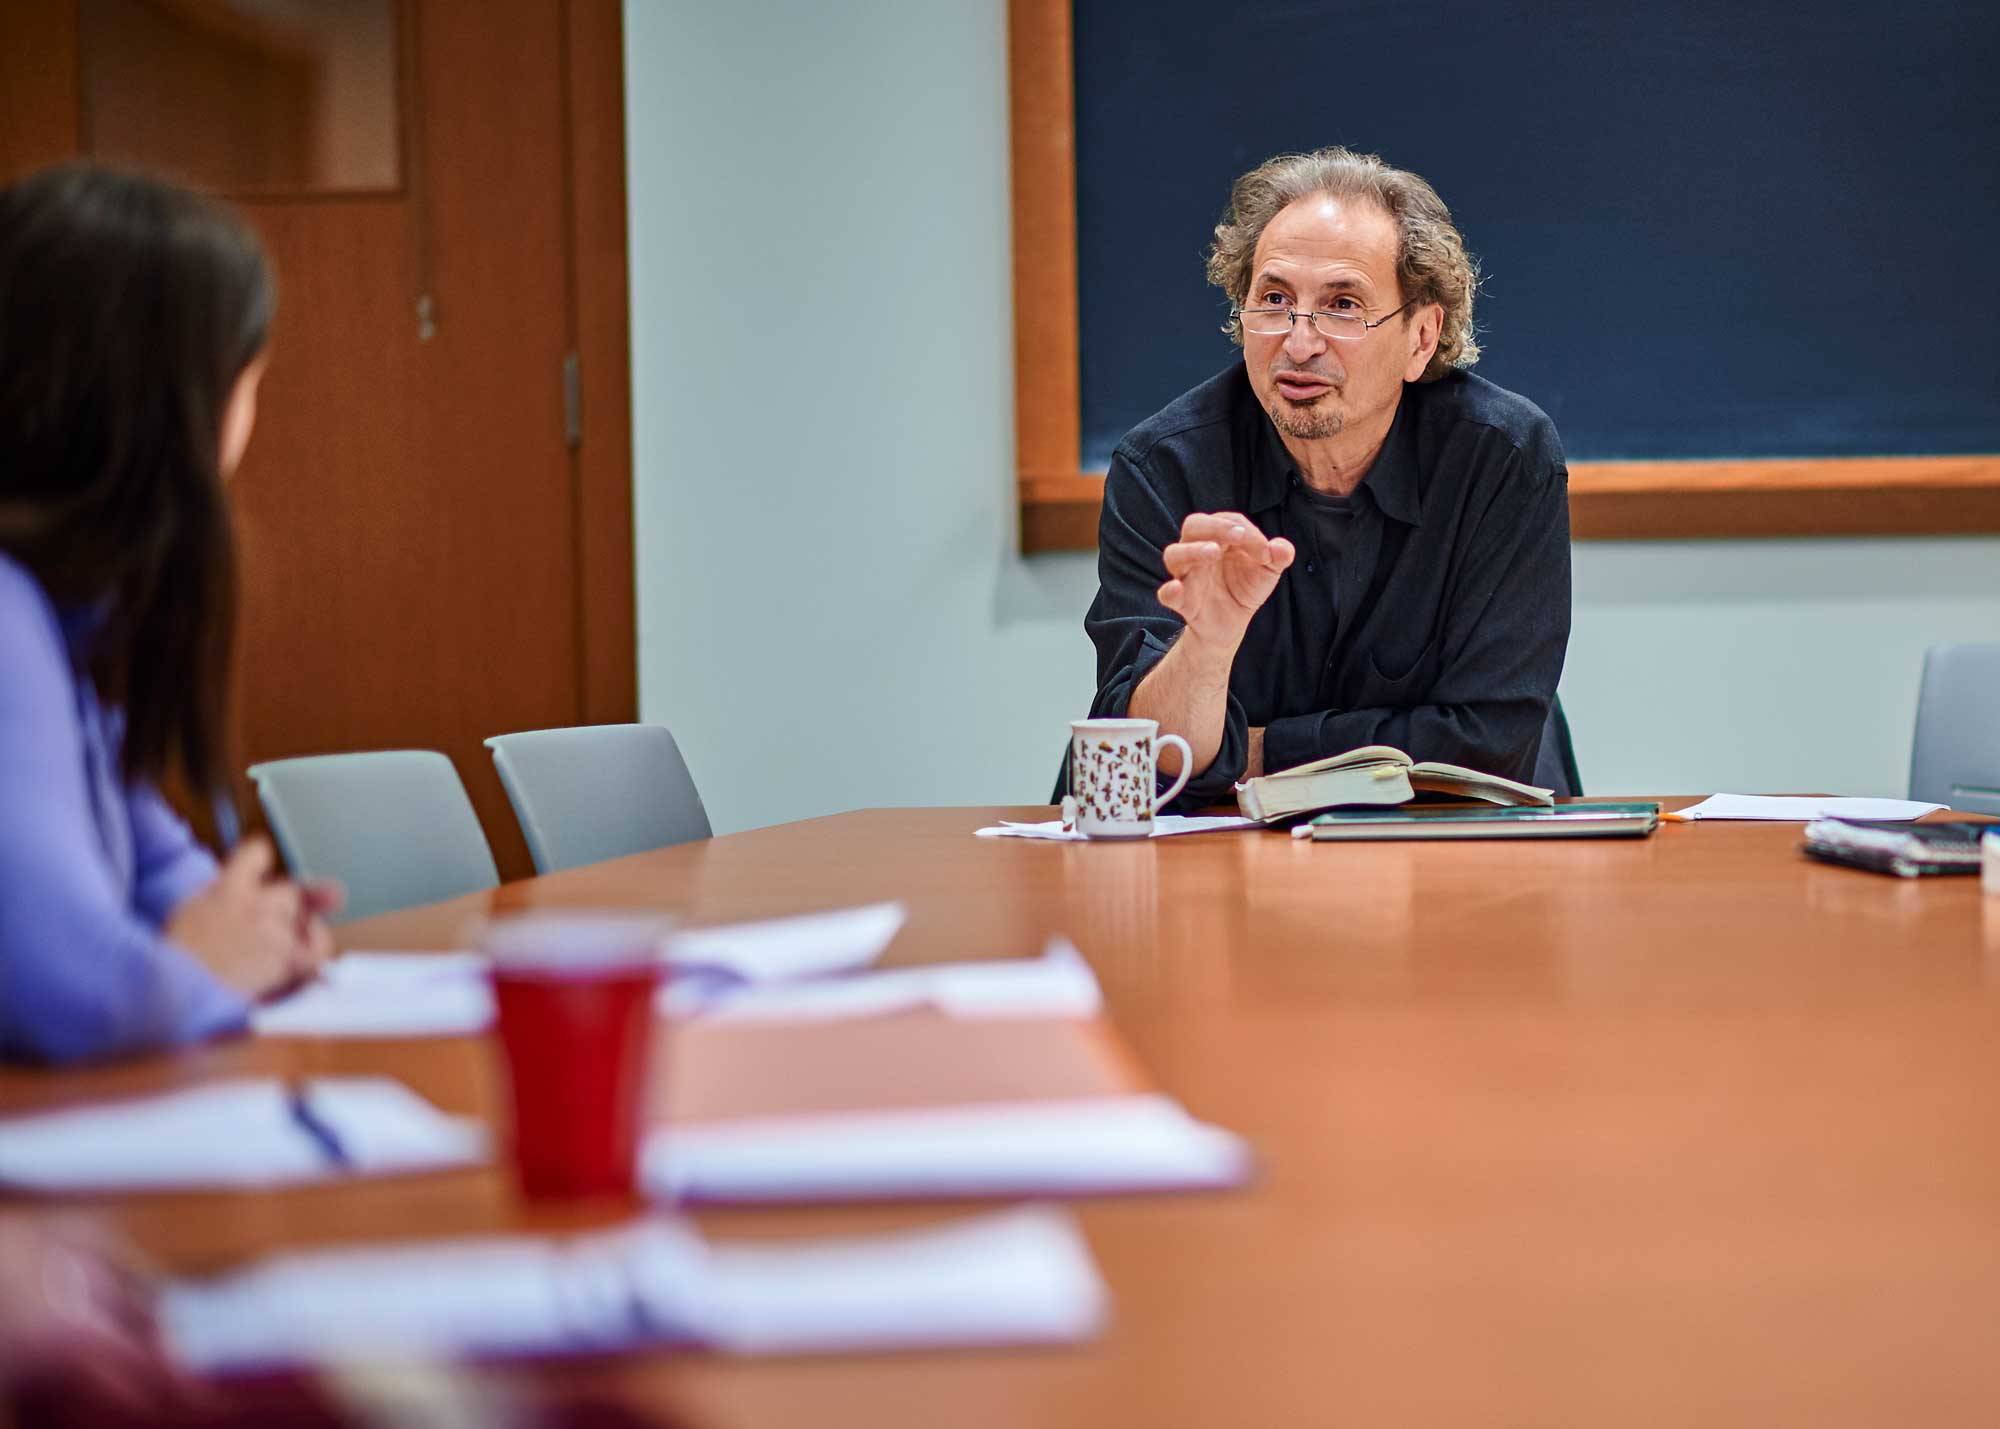 Professor Peter Balakian speaks to student while seated at a table